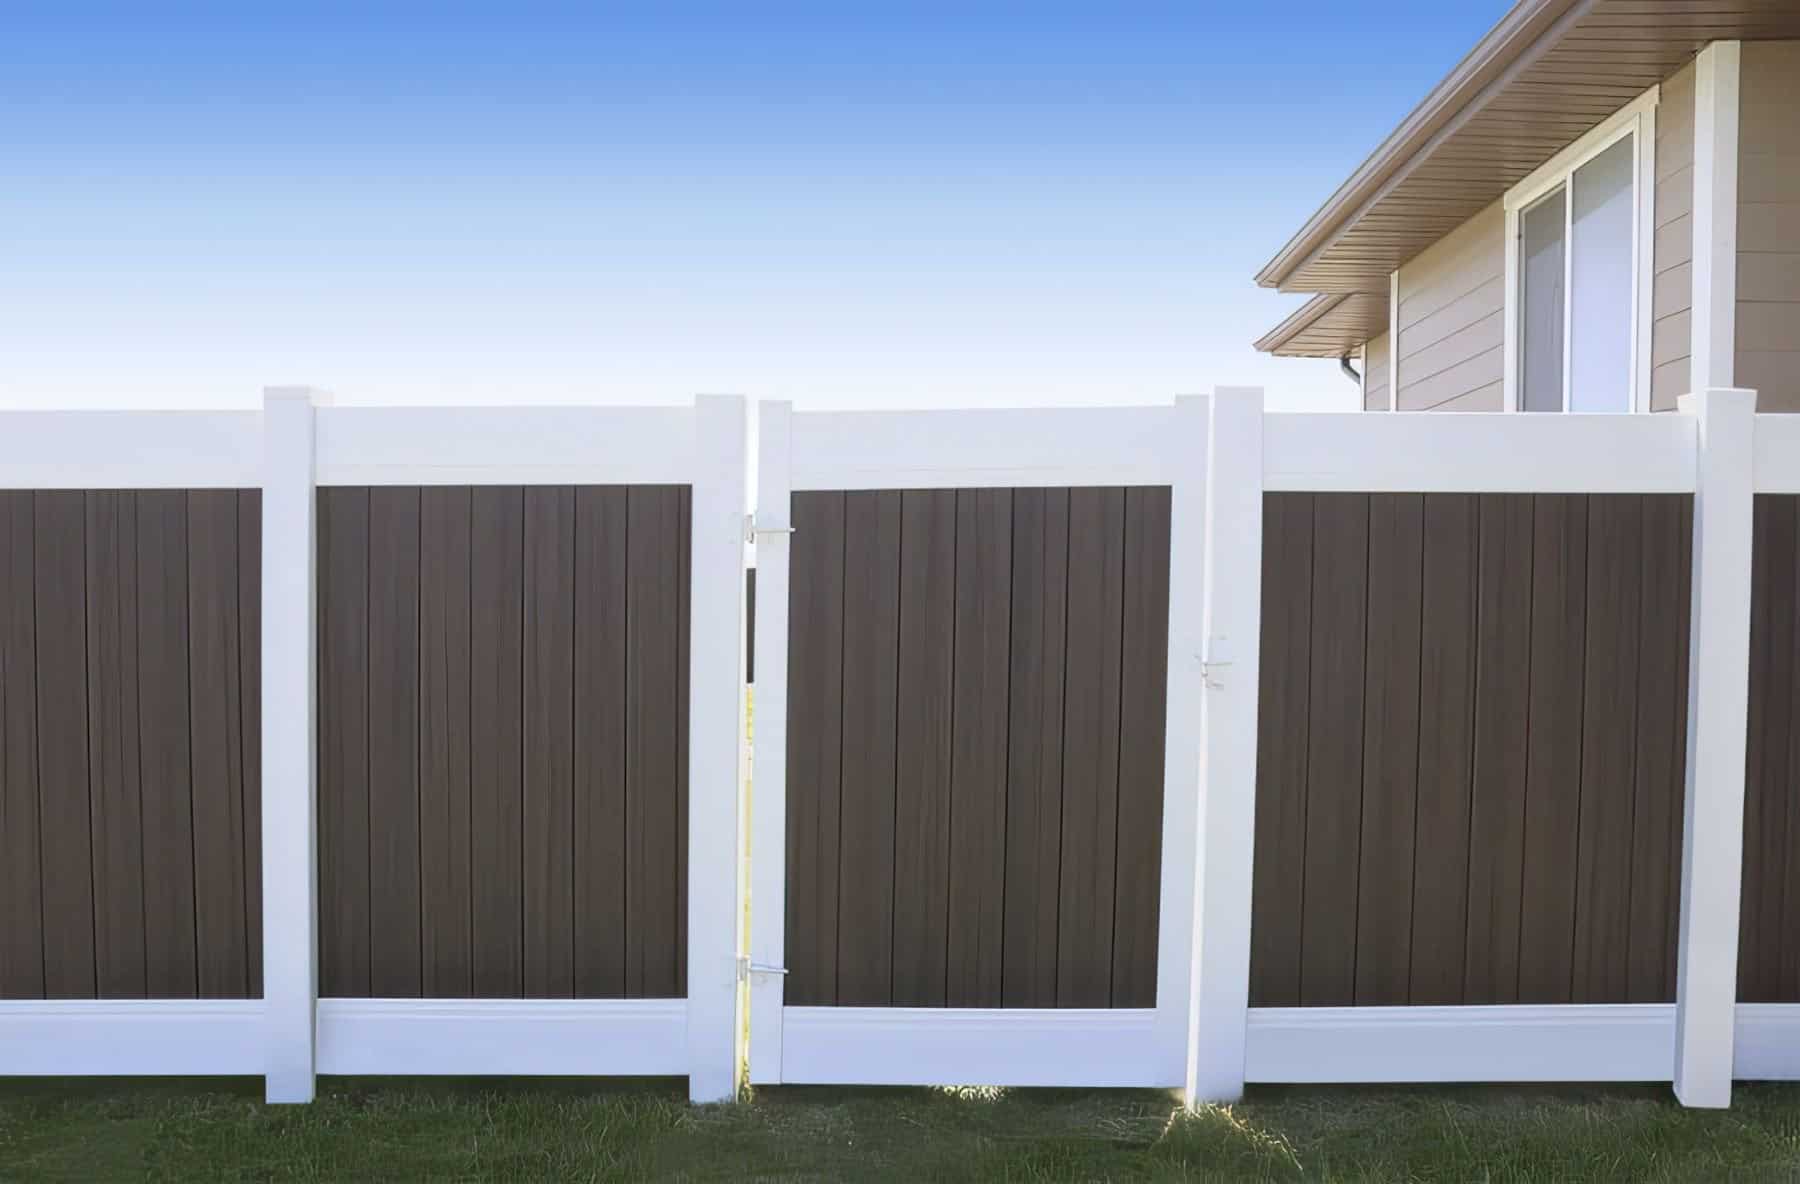 Vinyl privacy two-tone fence with thick white borders and a contrasting dark brown centre along with gates leading inside.